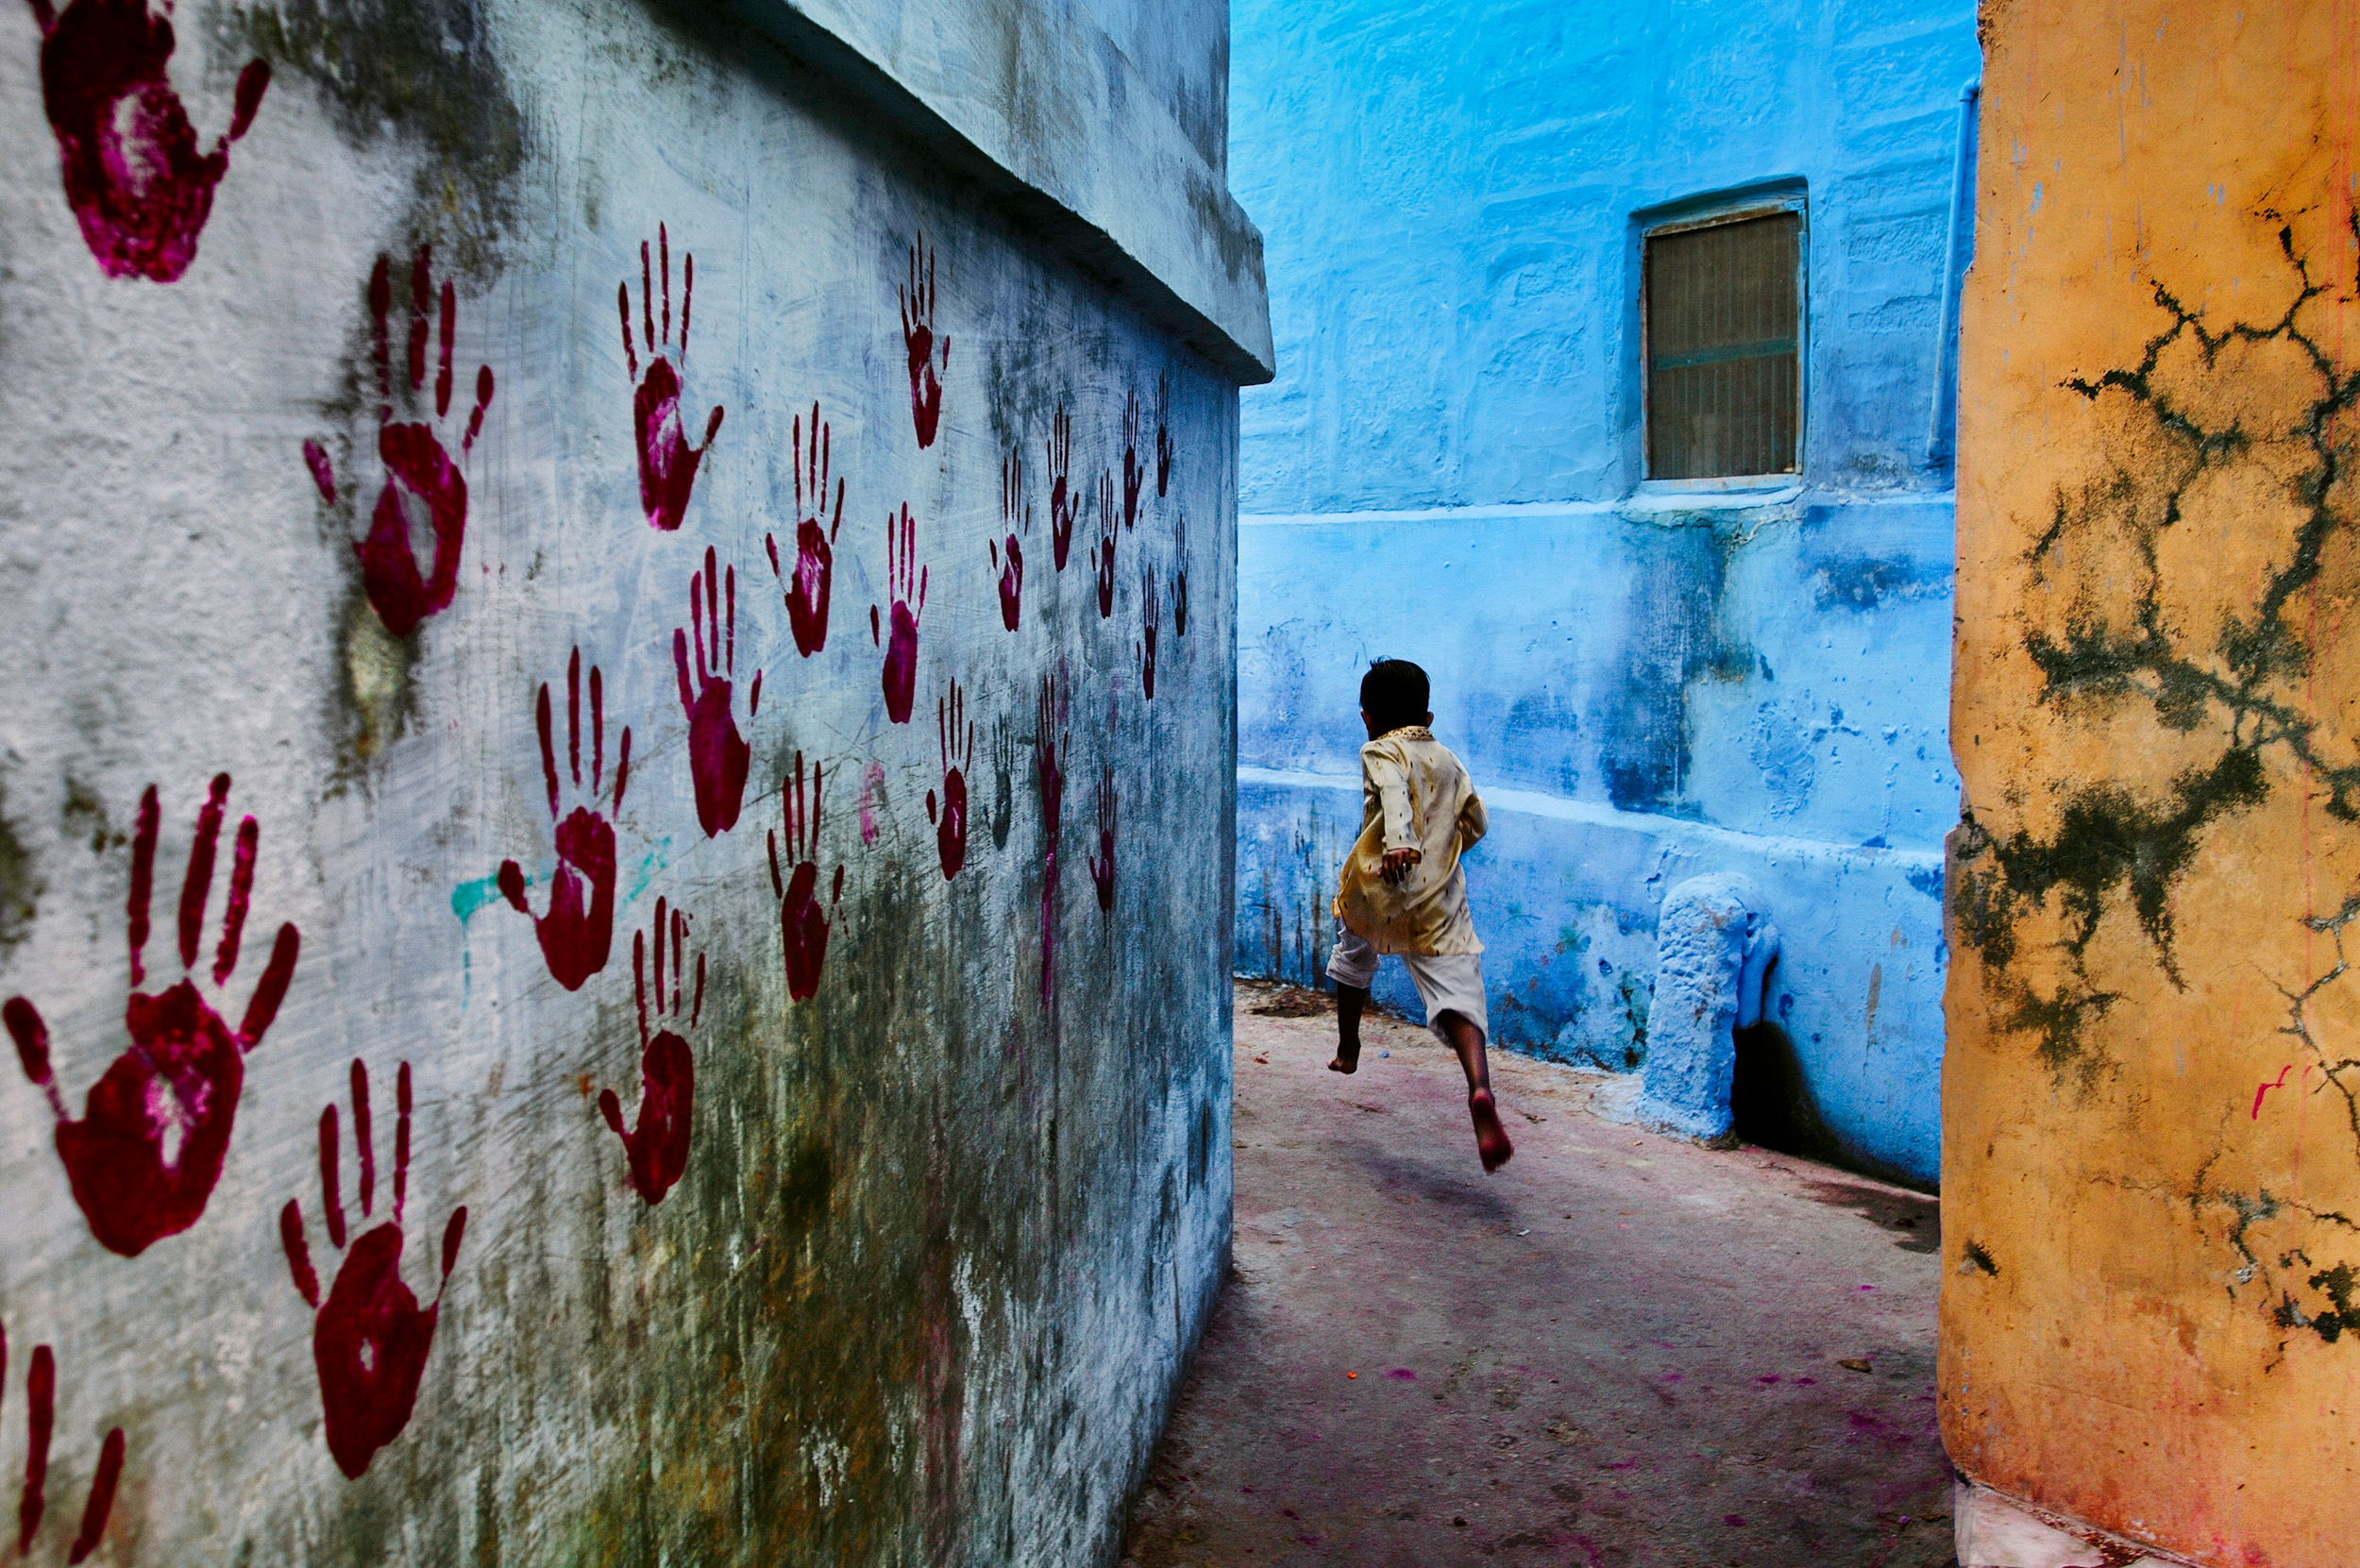 From these hands by Steve McCurry